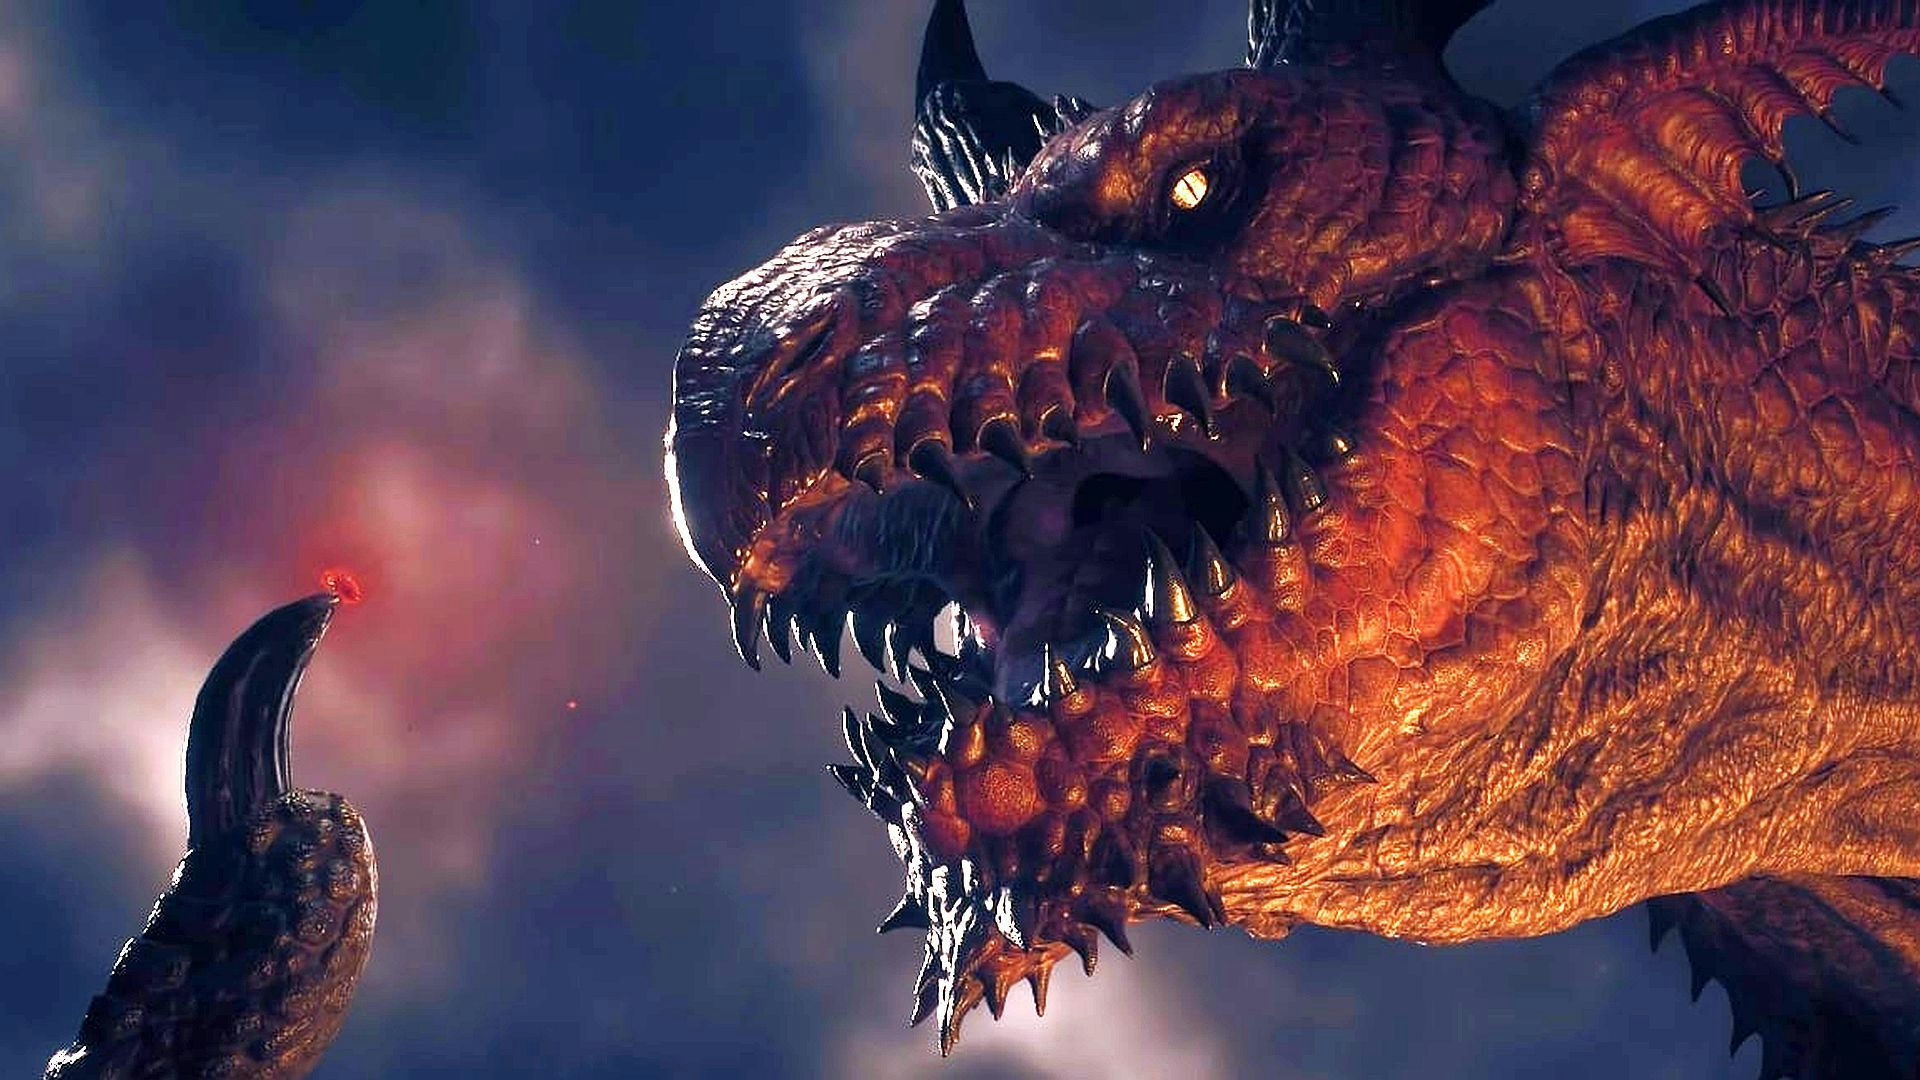 What's caught your eye about Dragon's Dogma 2? Tell us to win a copy of the game!